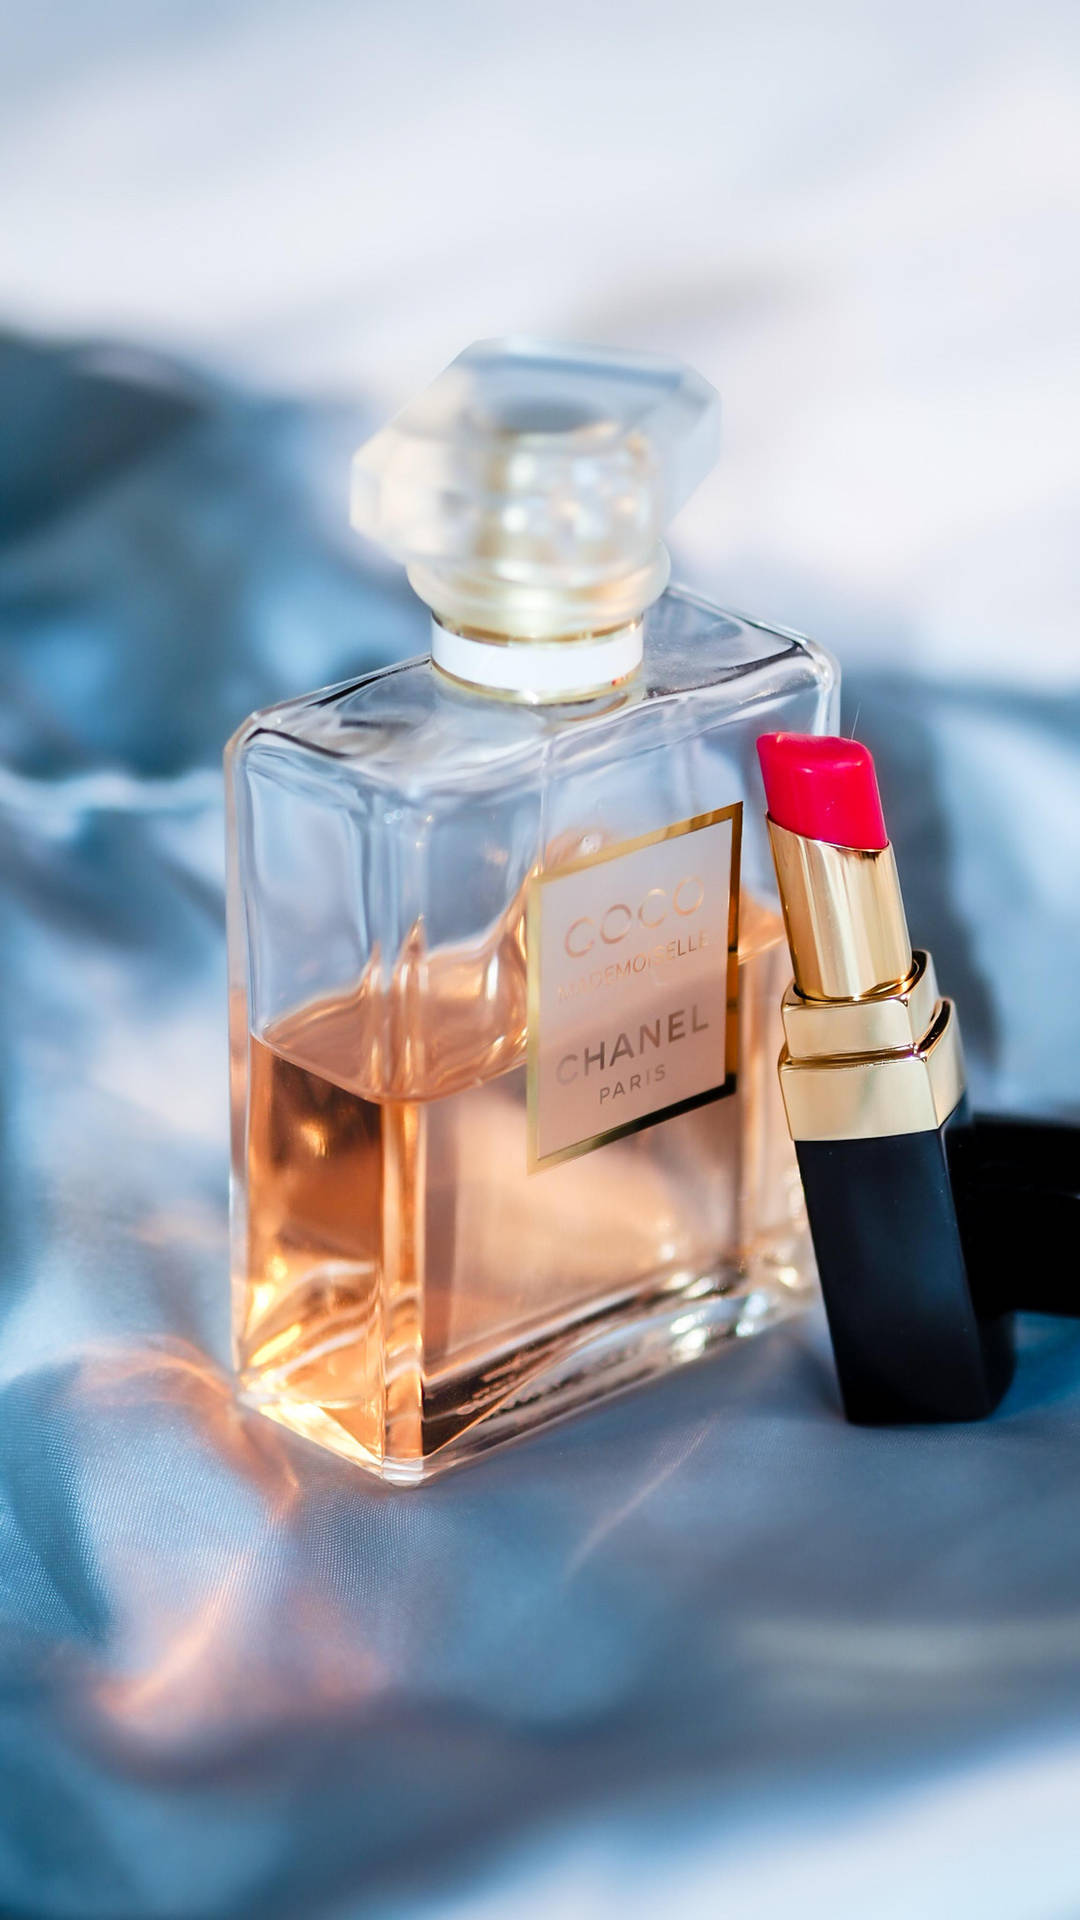 Chanel Aesthetic Perfume And Lipstick Background